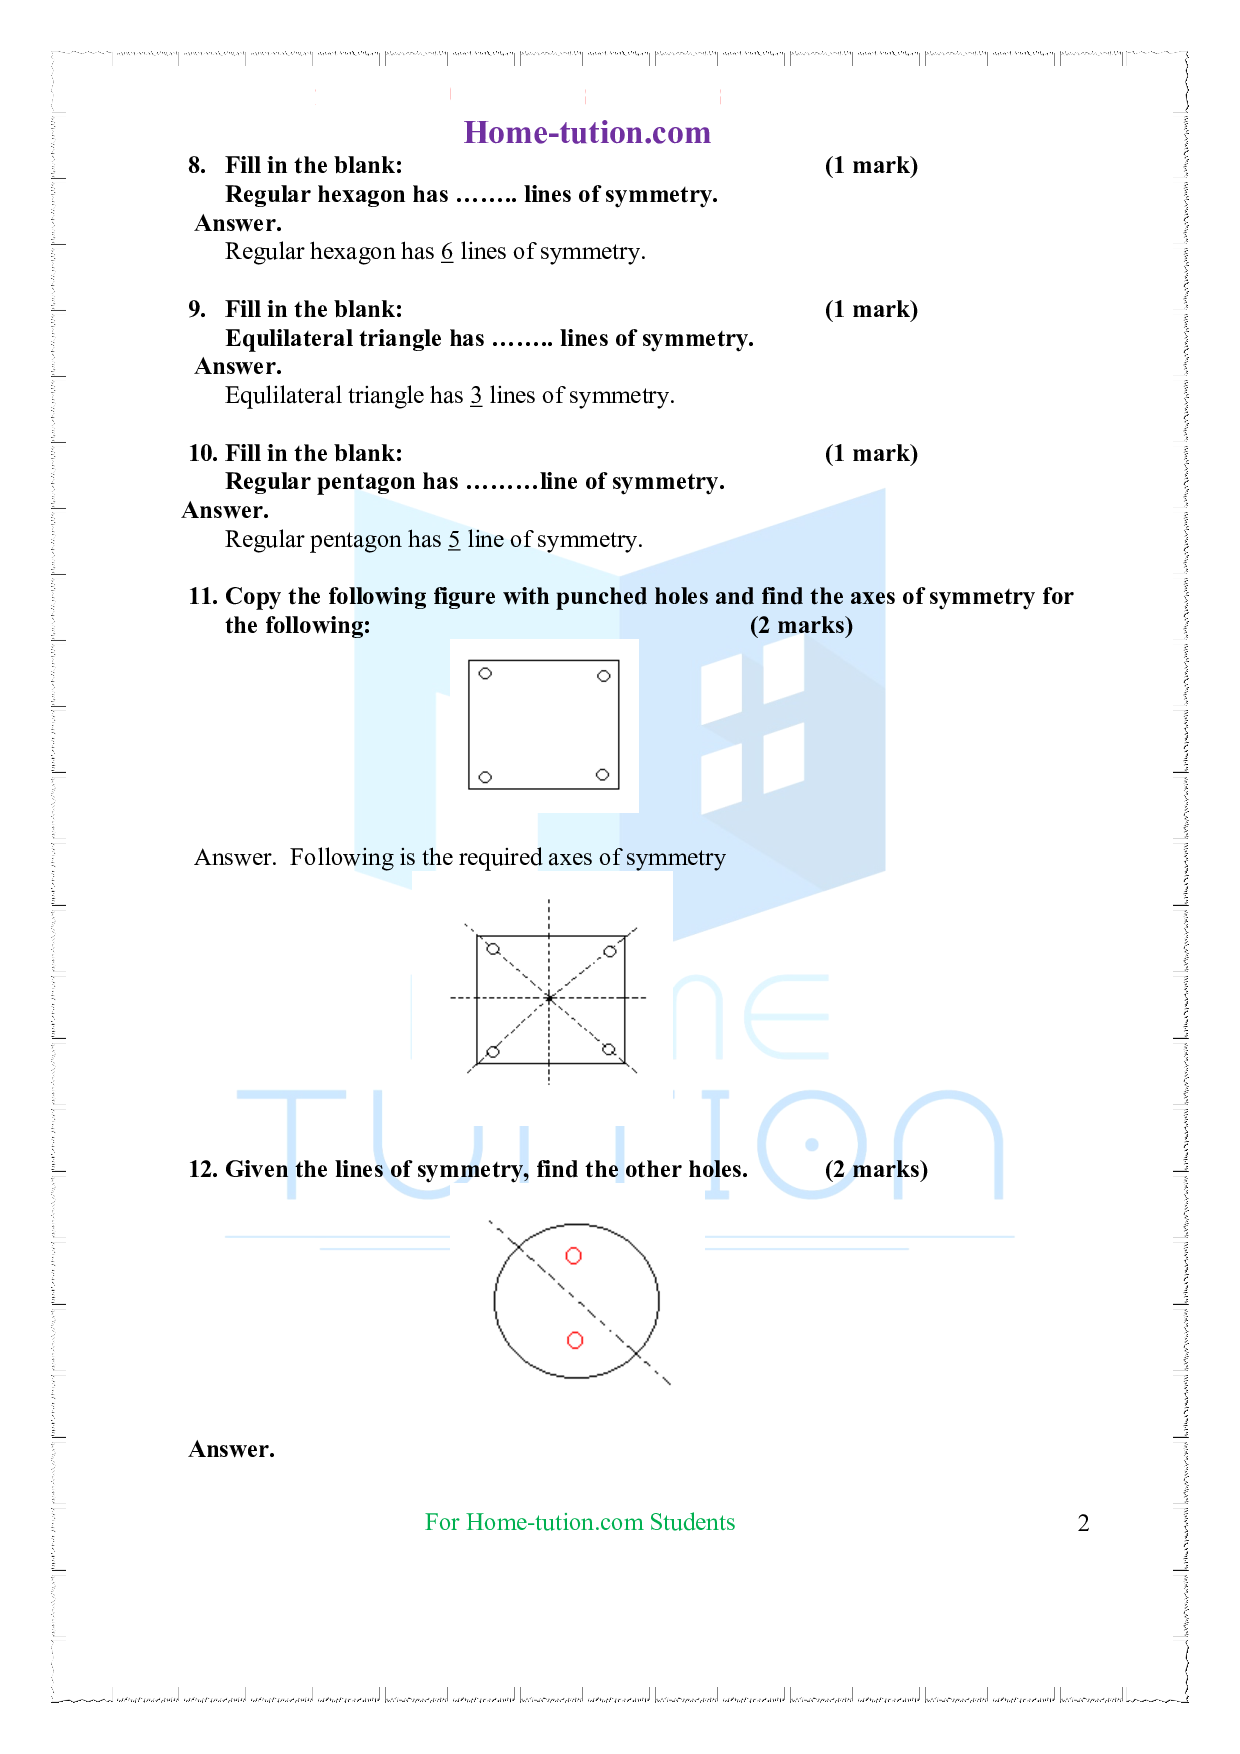 Extra Questions on Class 7 Maths Chapter 14 Symmetry